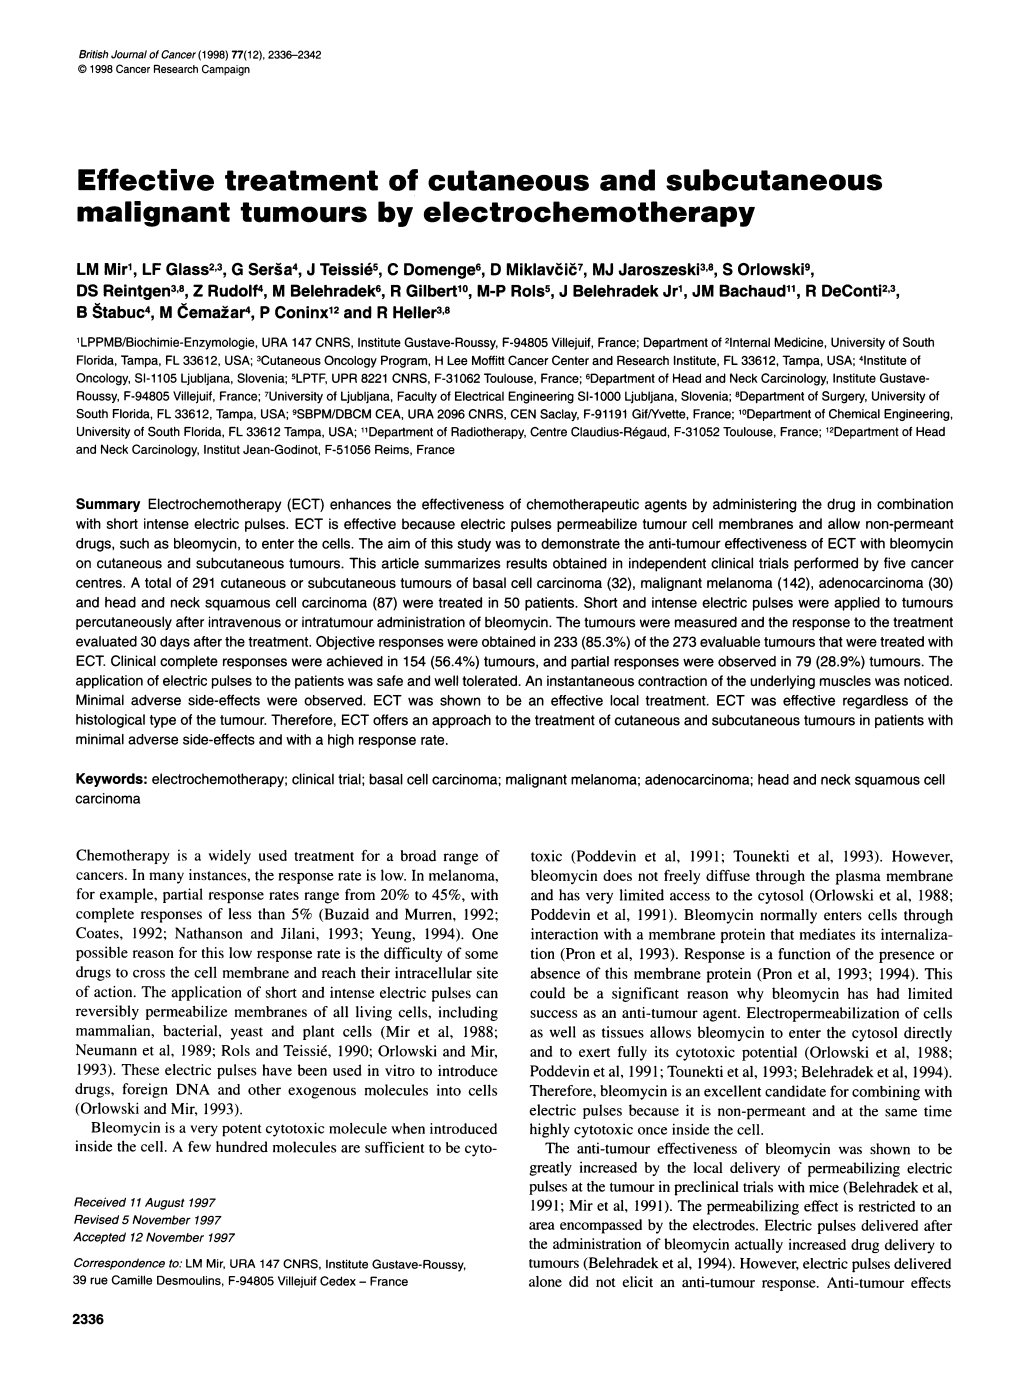 Effective Treatment of Cutaneous and Subcutaneous Malignant Tumours by Electrochemotherapy